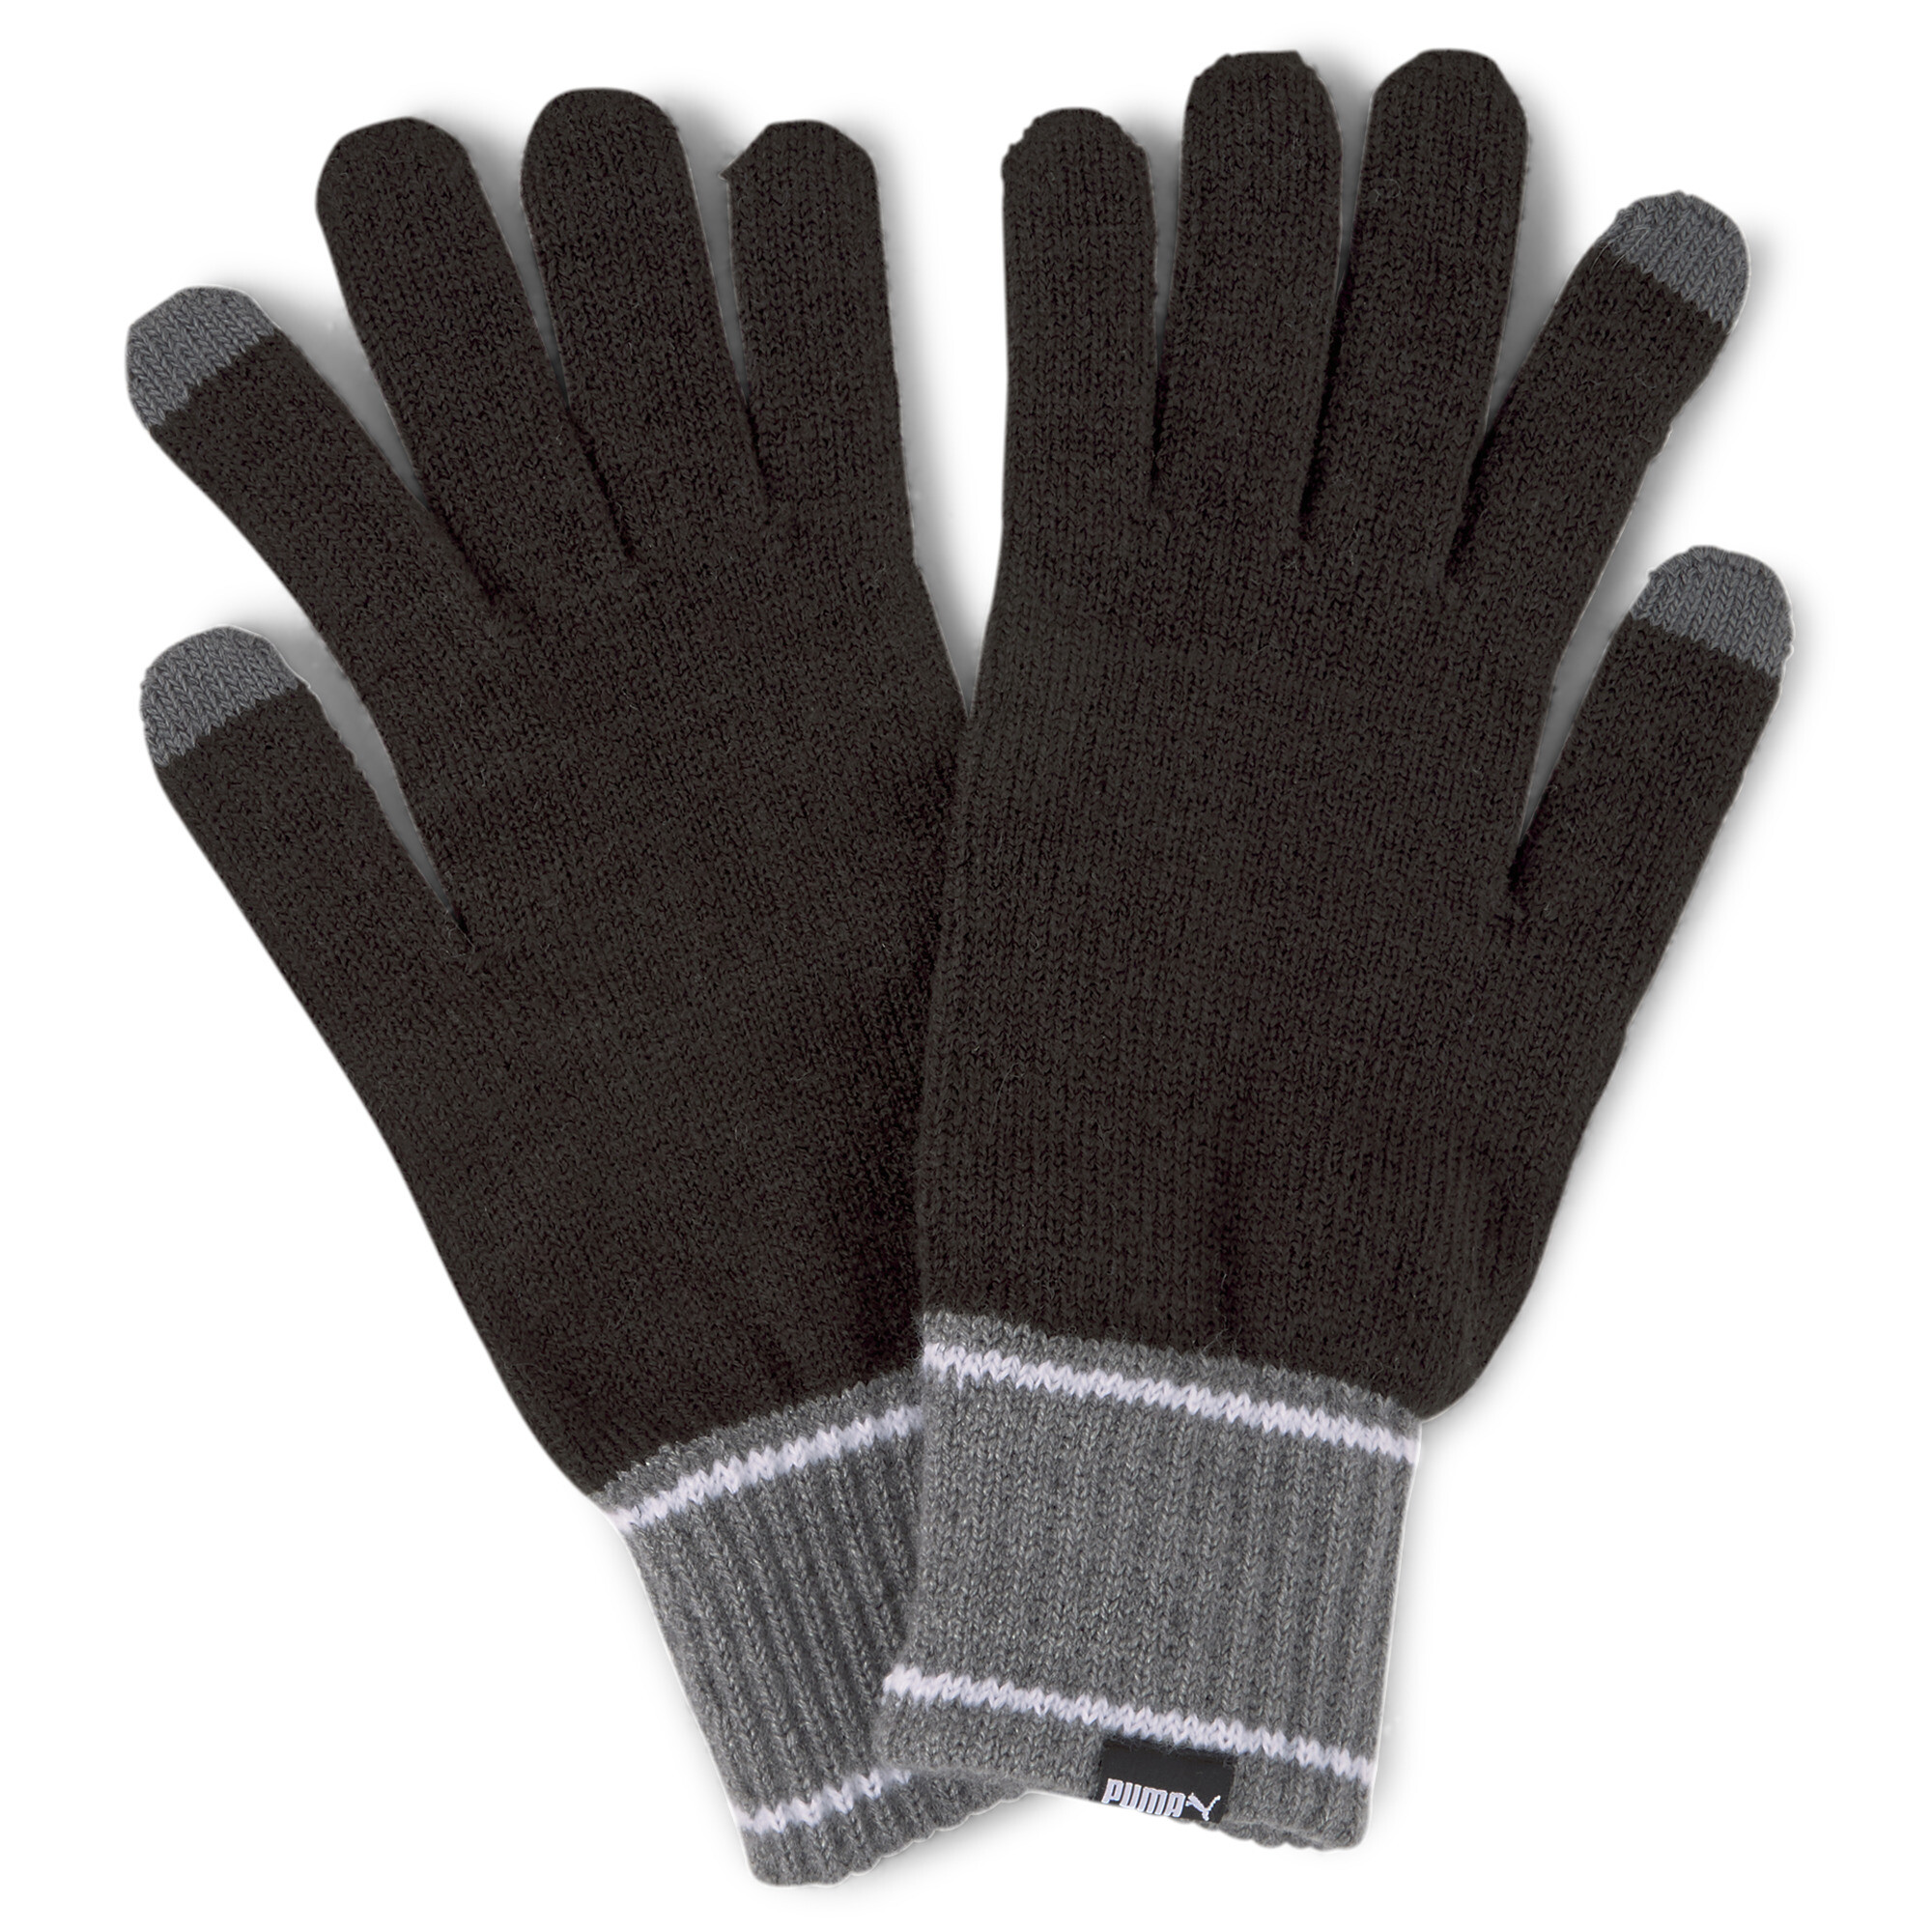 Puma Knitted Gloves, Black, Size S, Accessories